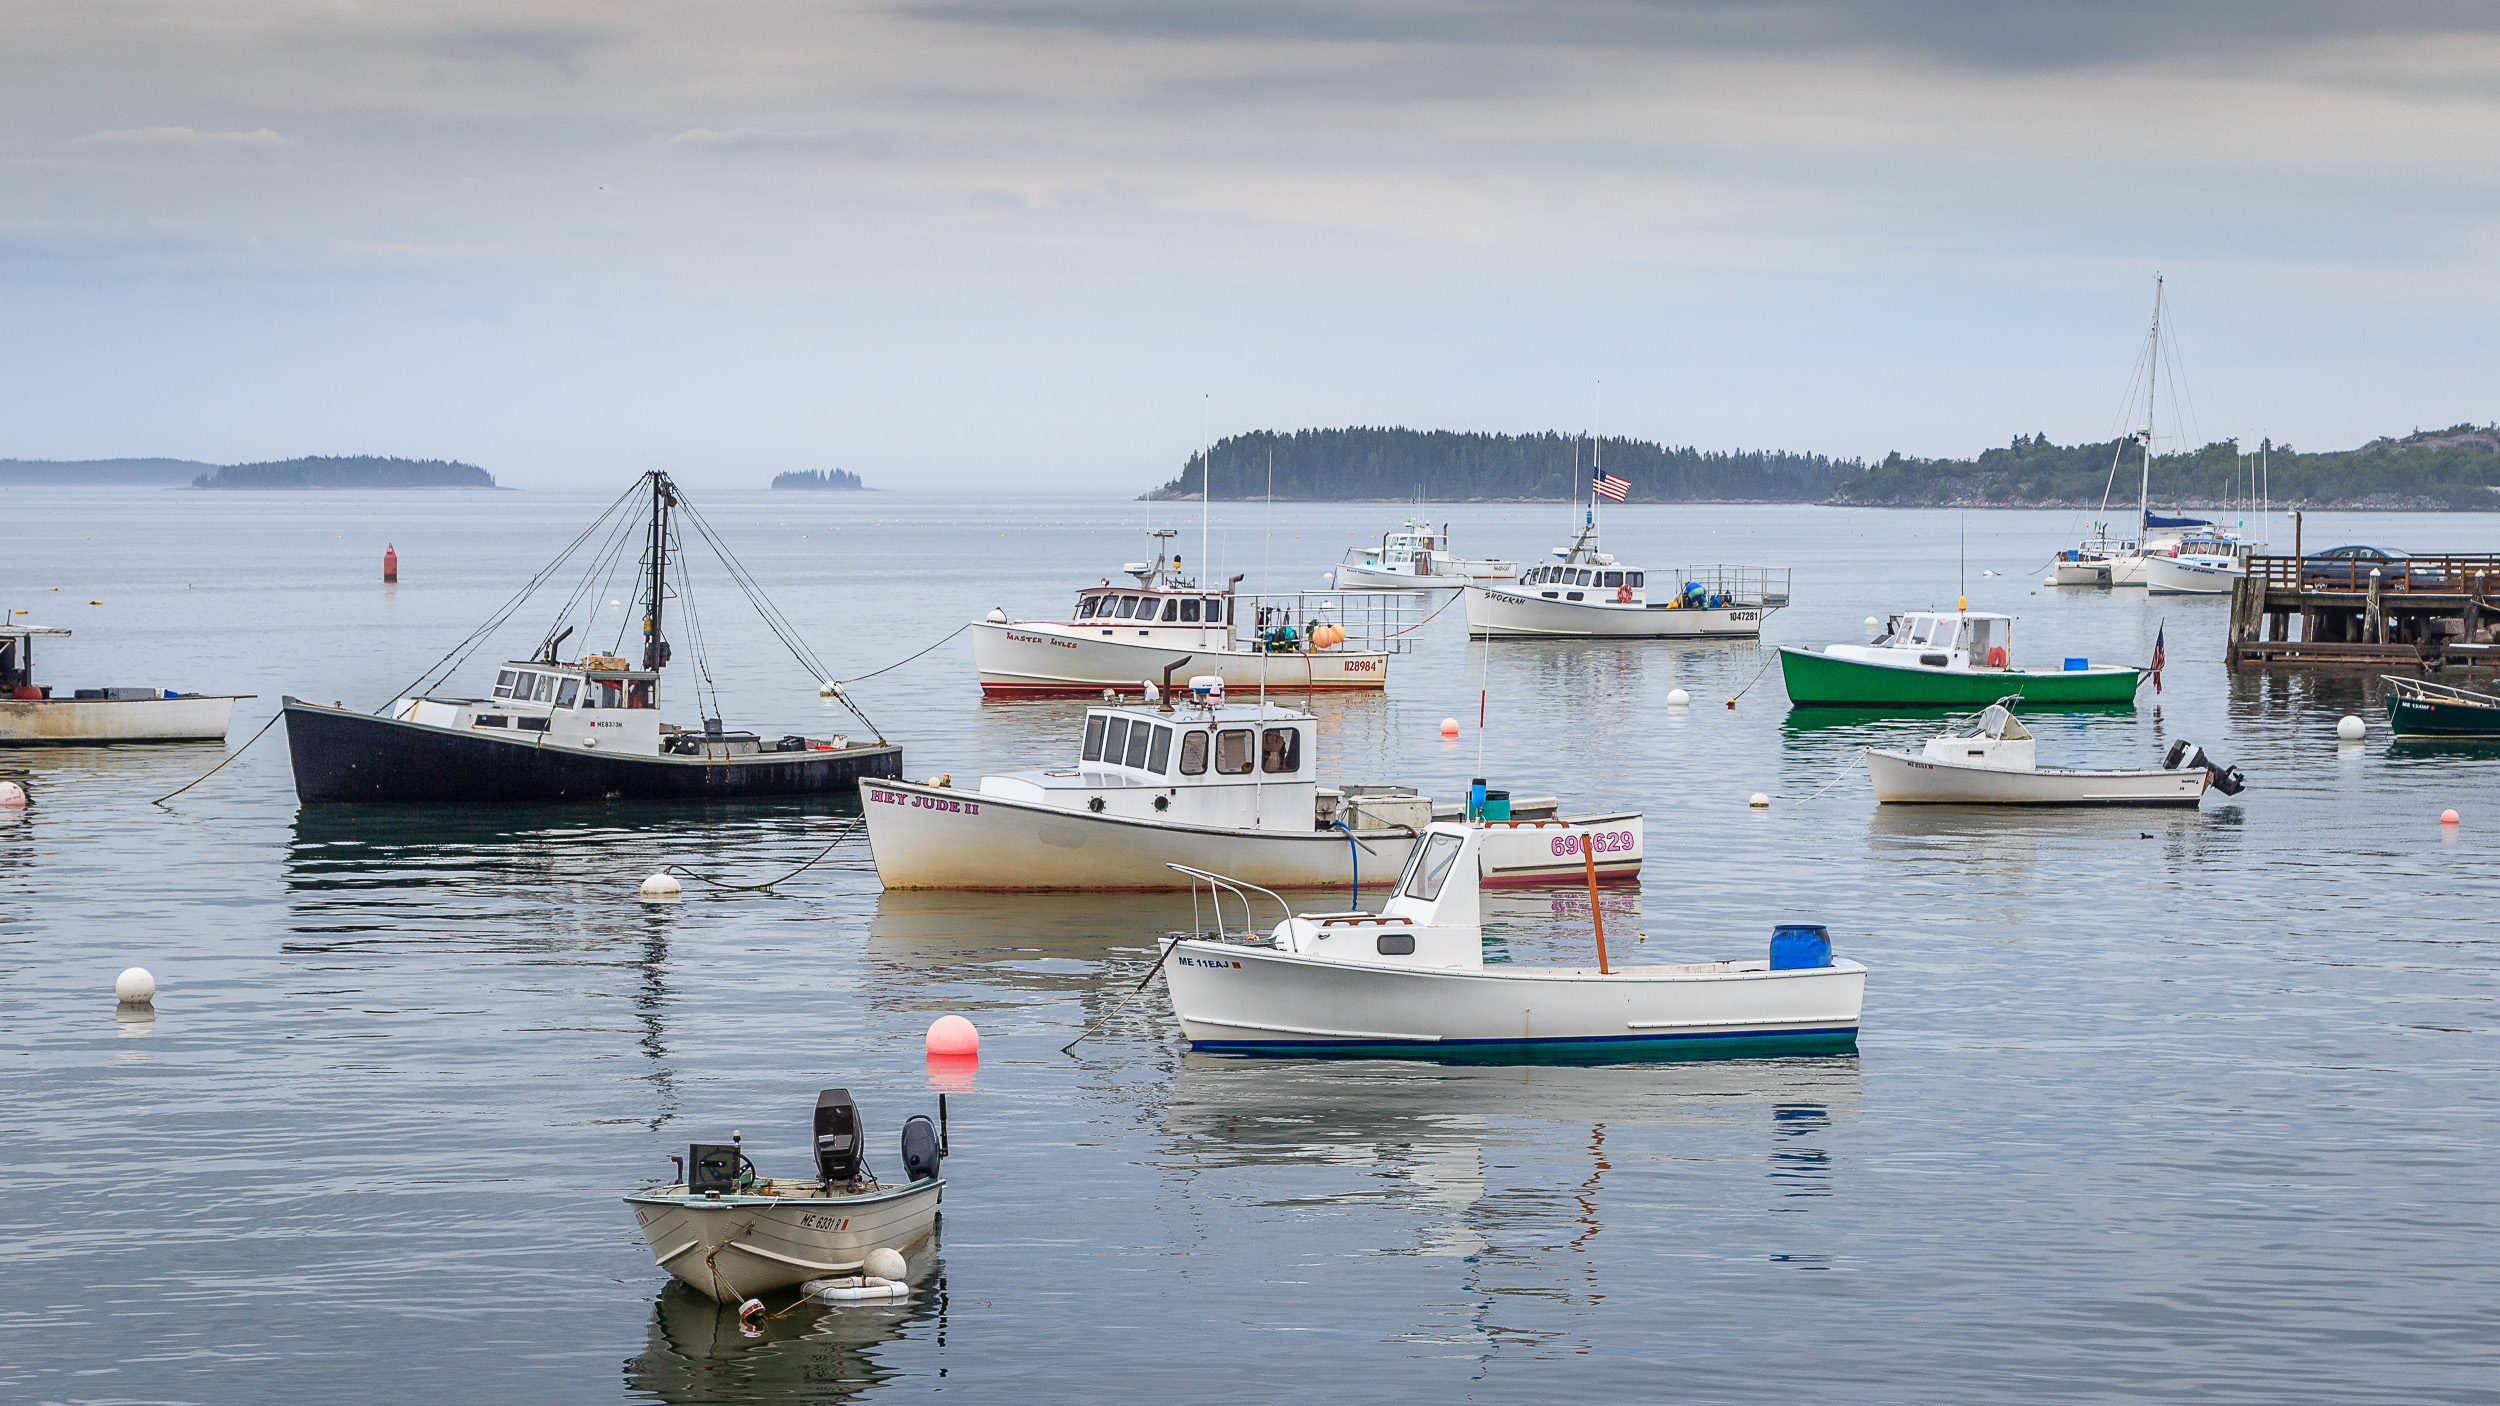 Lobster boats in harbor.